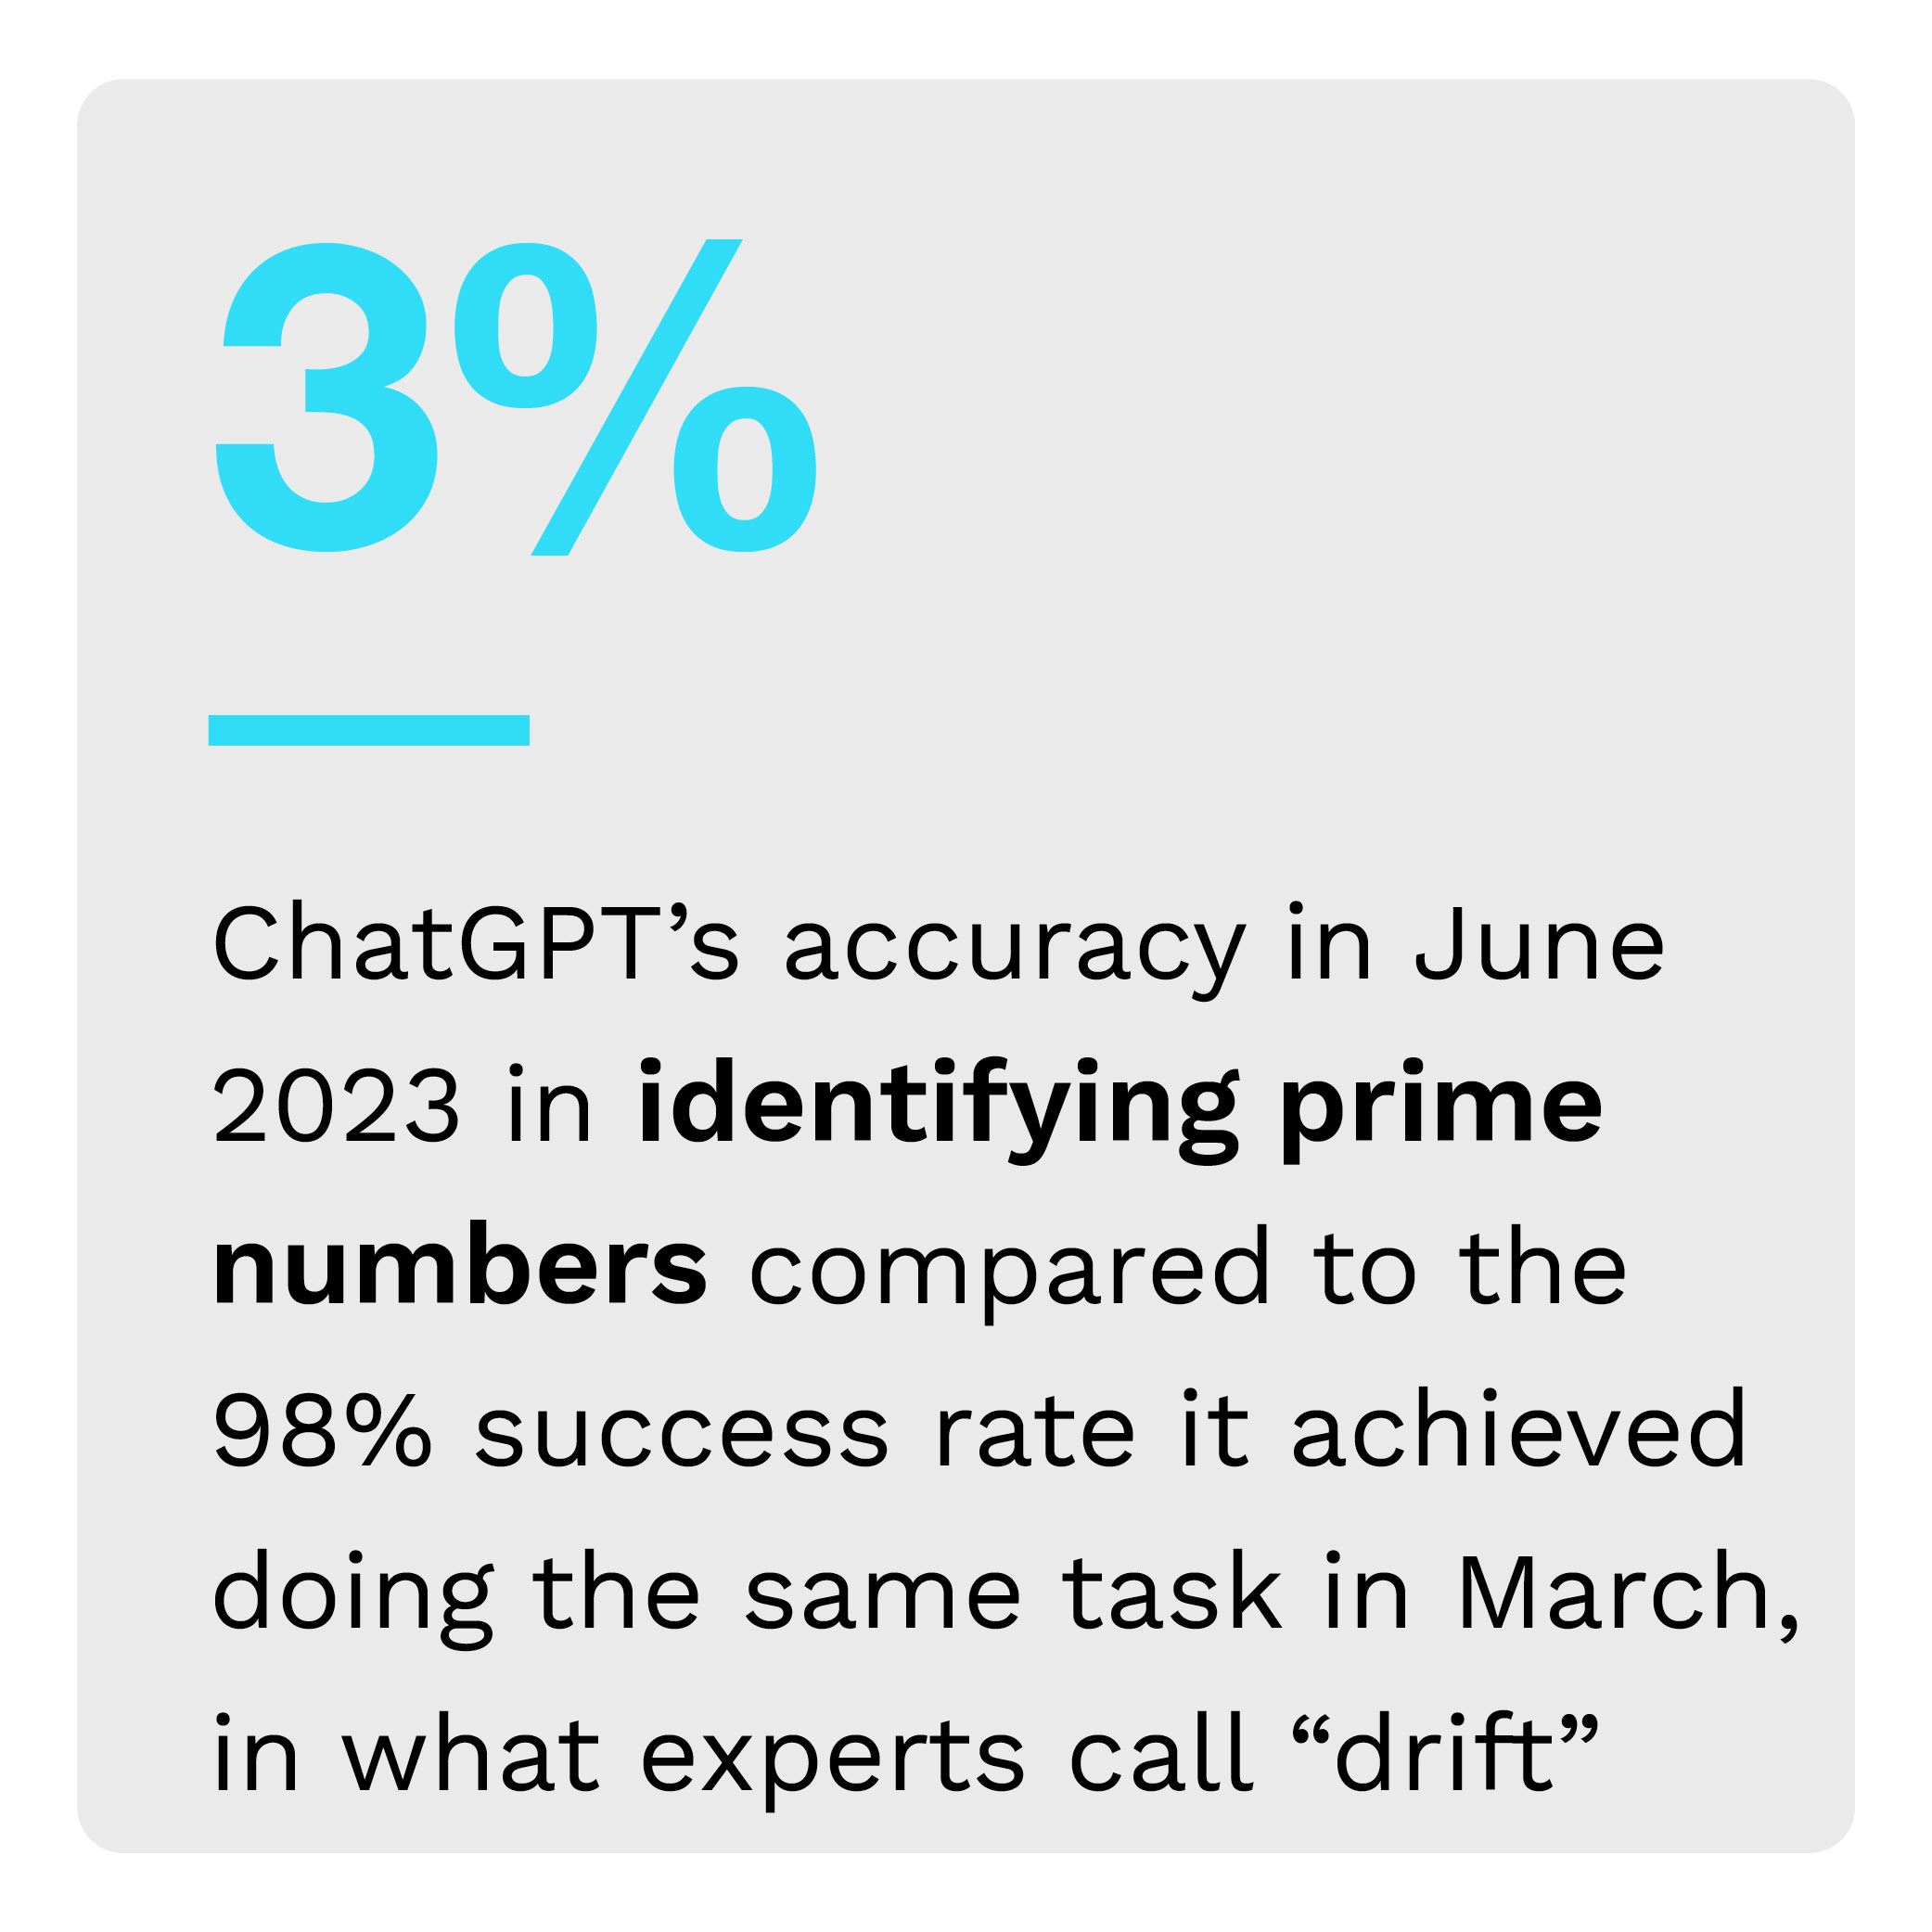 3%: ChatGPT’s accuracy in June 2023 in identifying prime numbers compared to the 98% success rate it achieved doing the same task in March, in what experts call “drift”